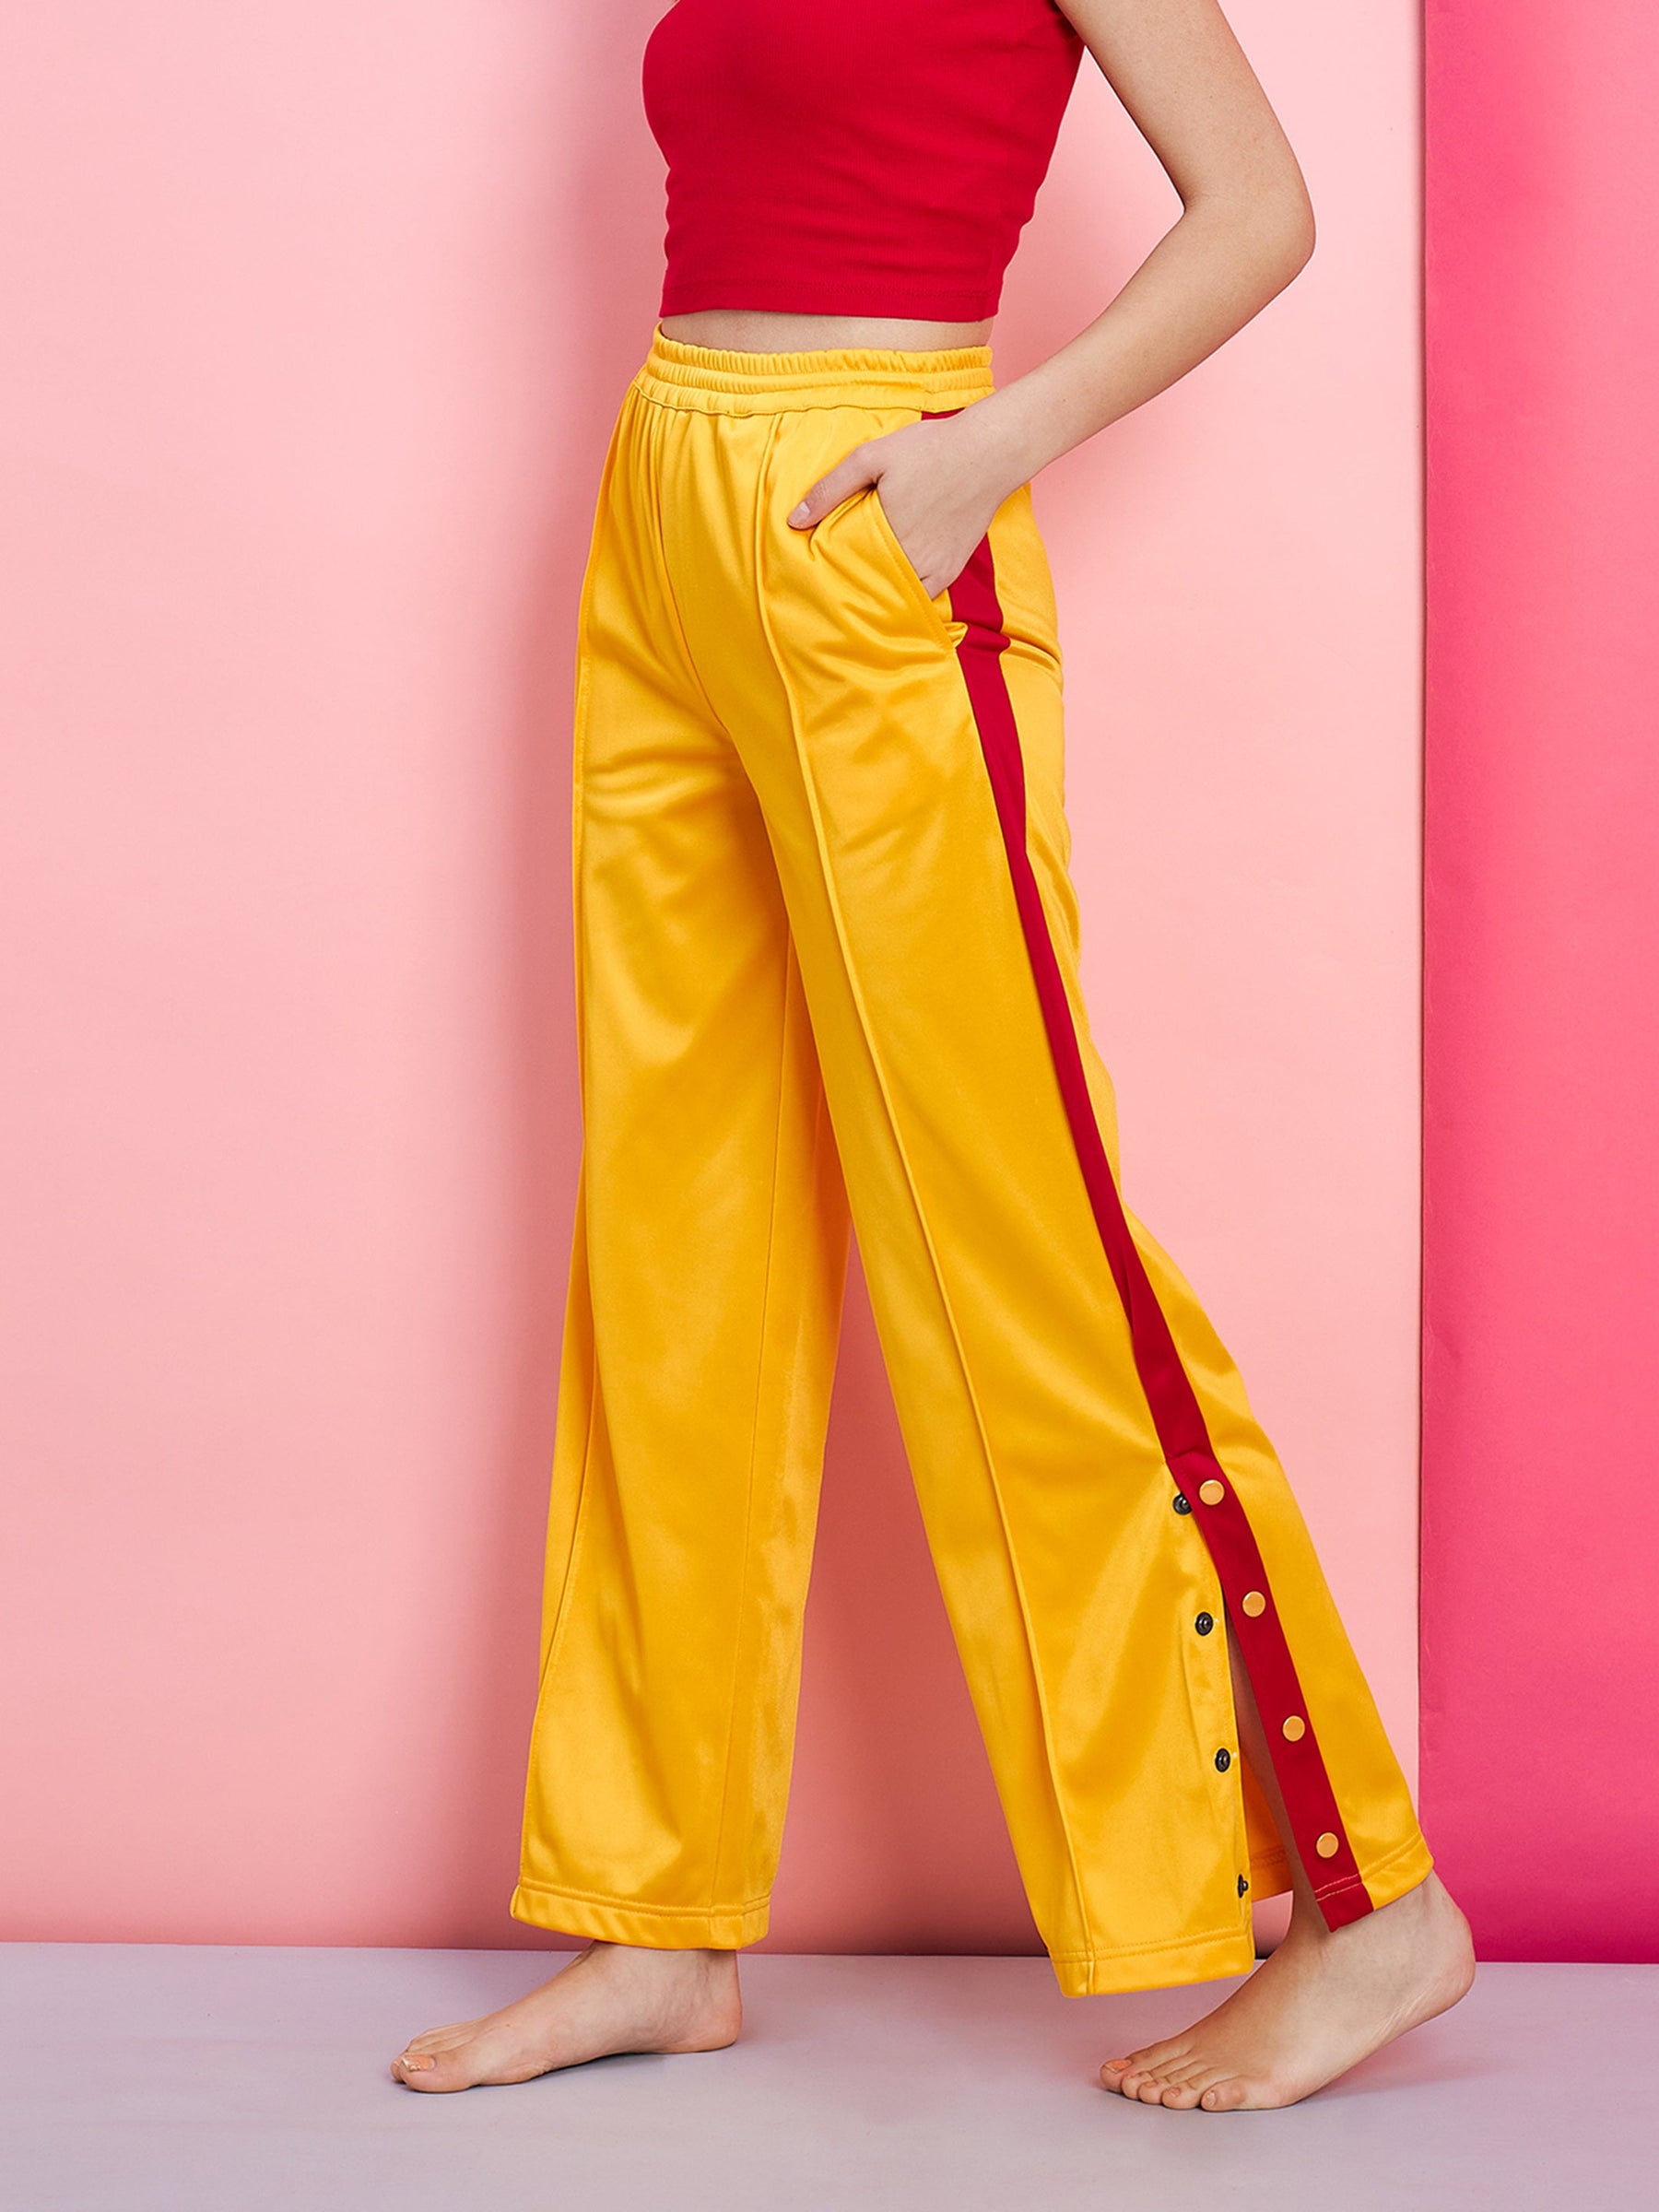 Chiclily Women's Wide Leg Lounge Pants with Pockets Lightweight High  Waisted Adjustable Tie Knot Loose Trousers, US Size Medium in Yellow -  Walmart.com